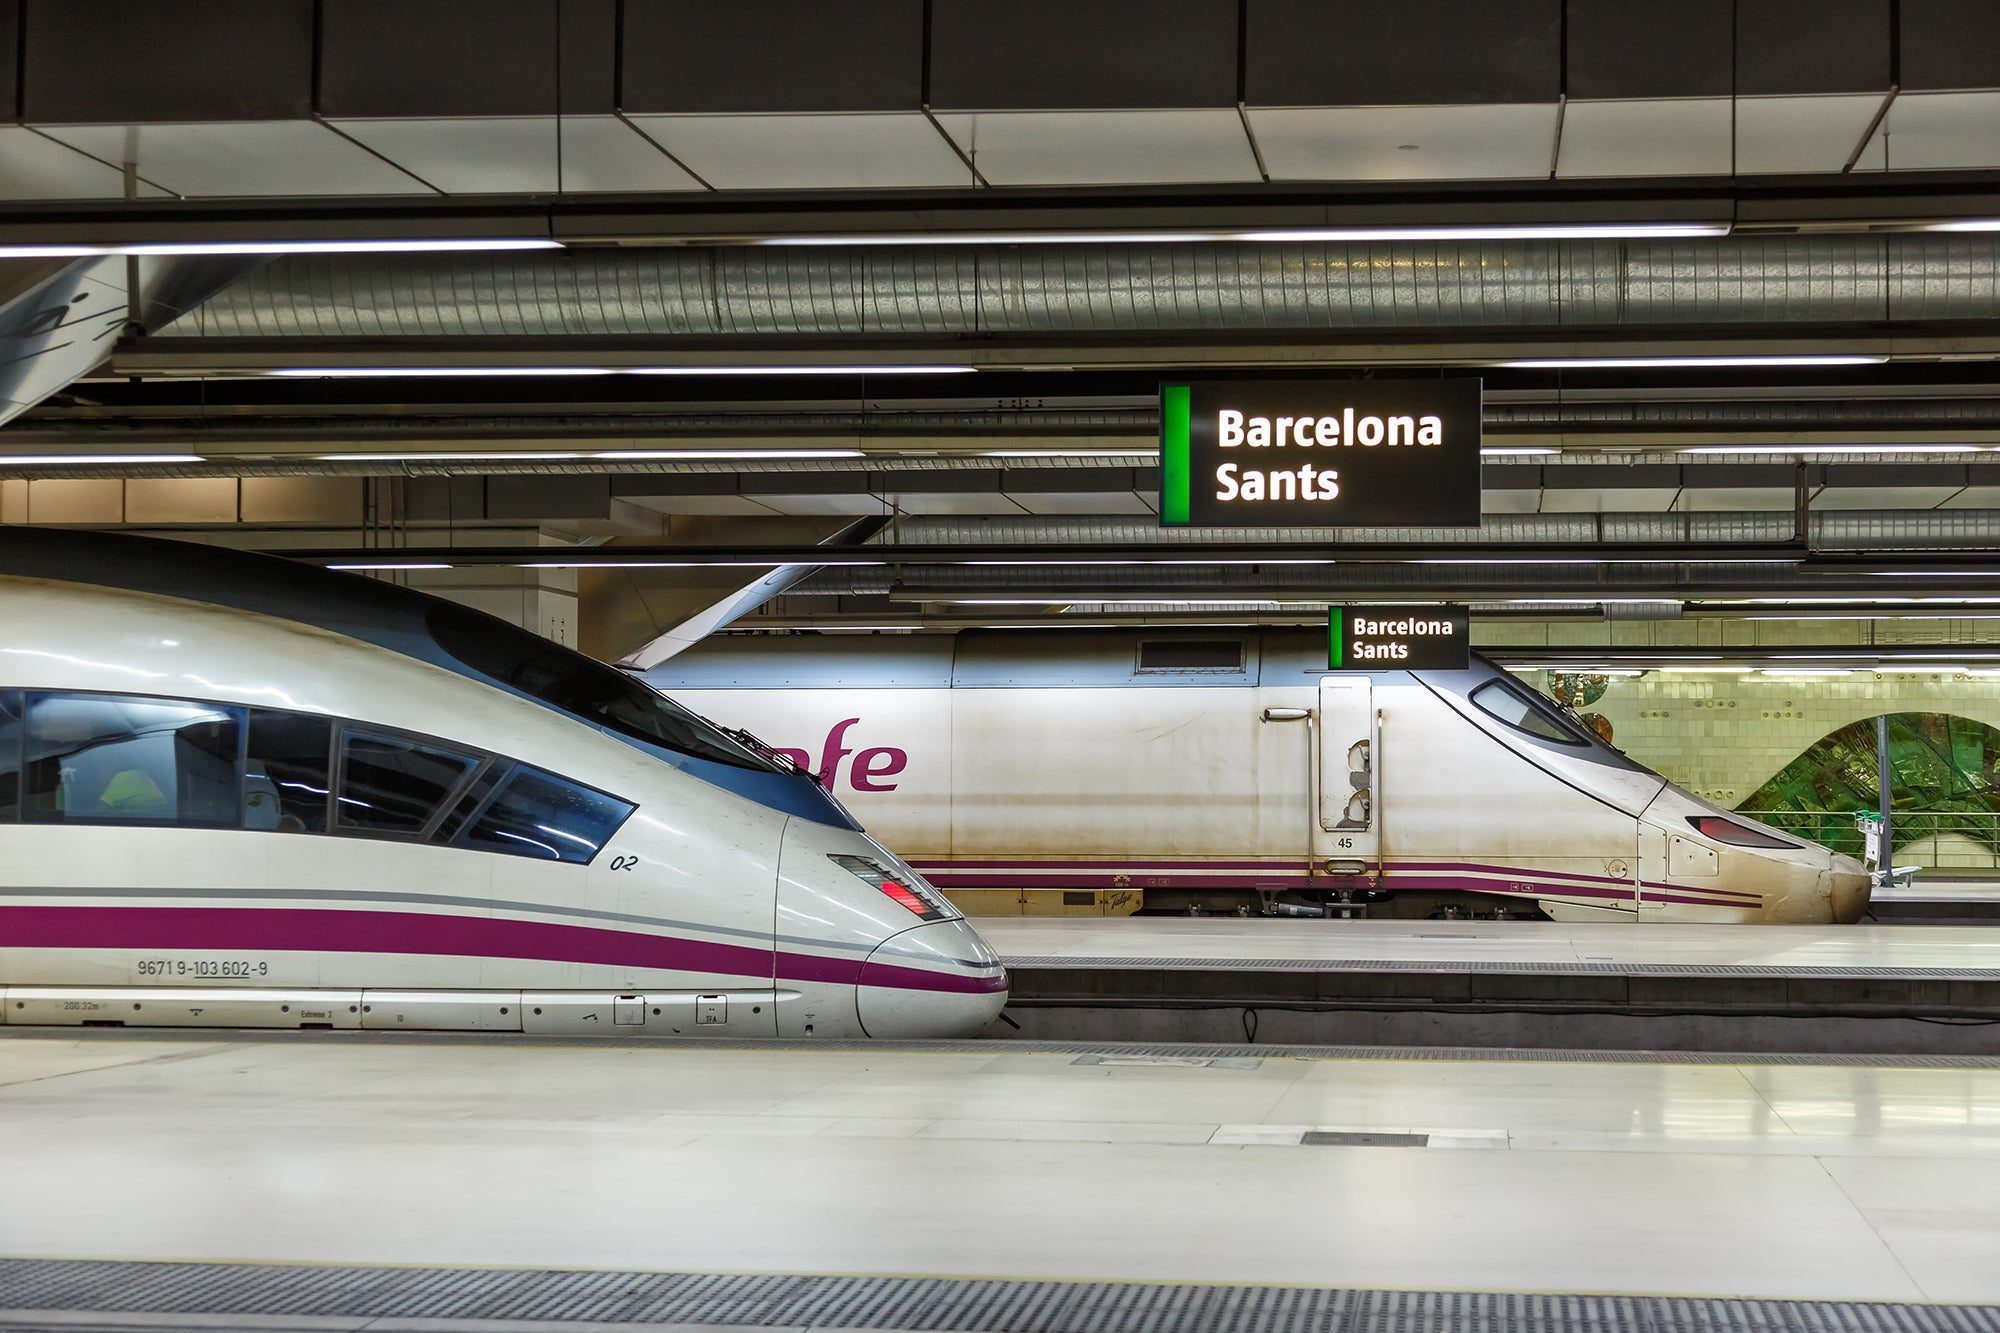 The impact of open access competition on high-speed rail in Europe